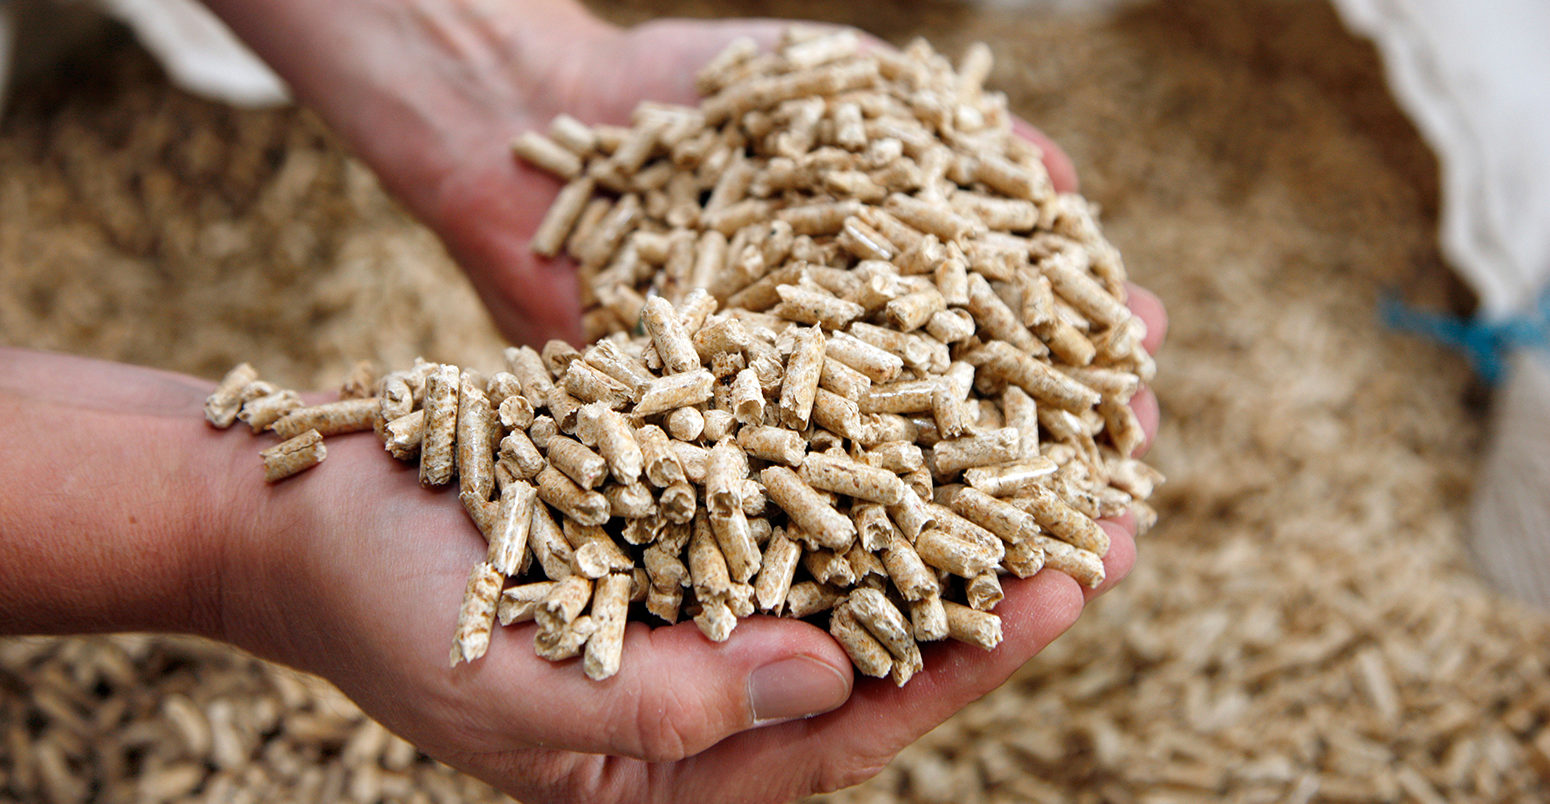 C82X7H Production of wood pellets. A type of wood fuel. Sawdust is manufactured to pellets. Used in boilers of central heating systems